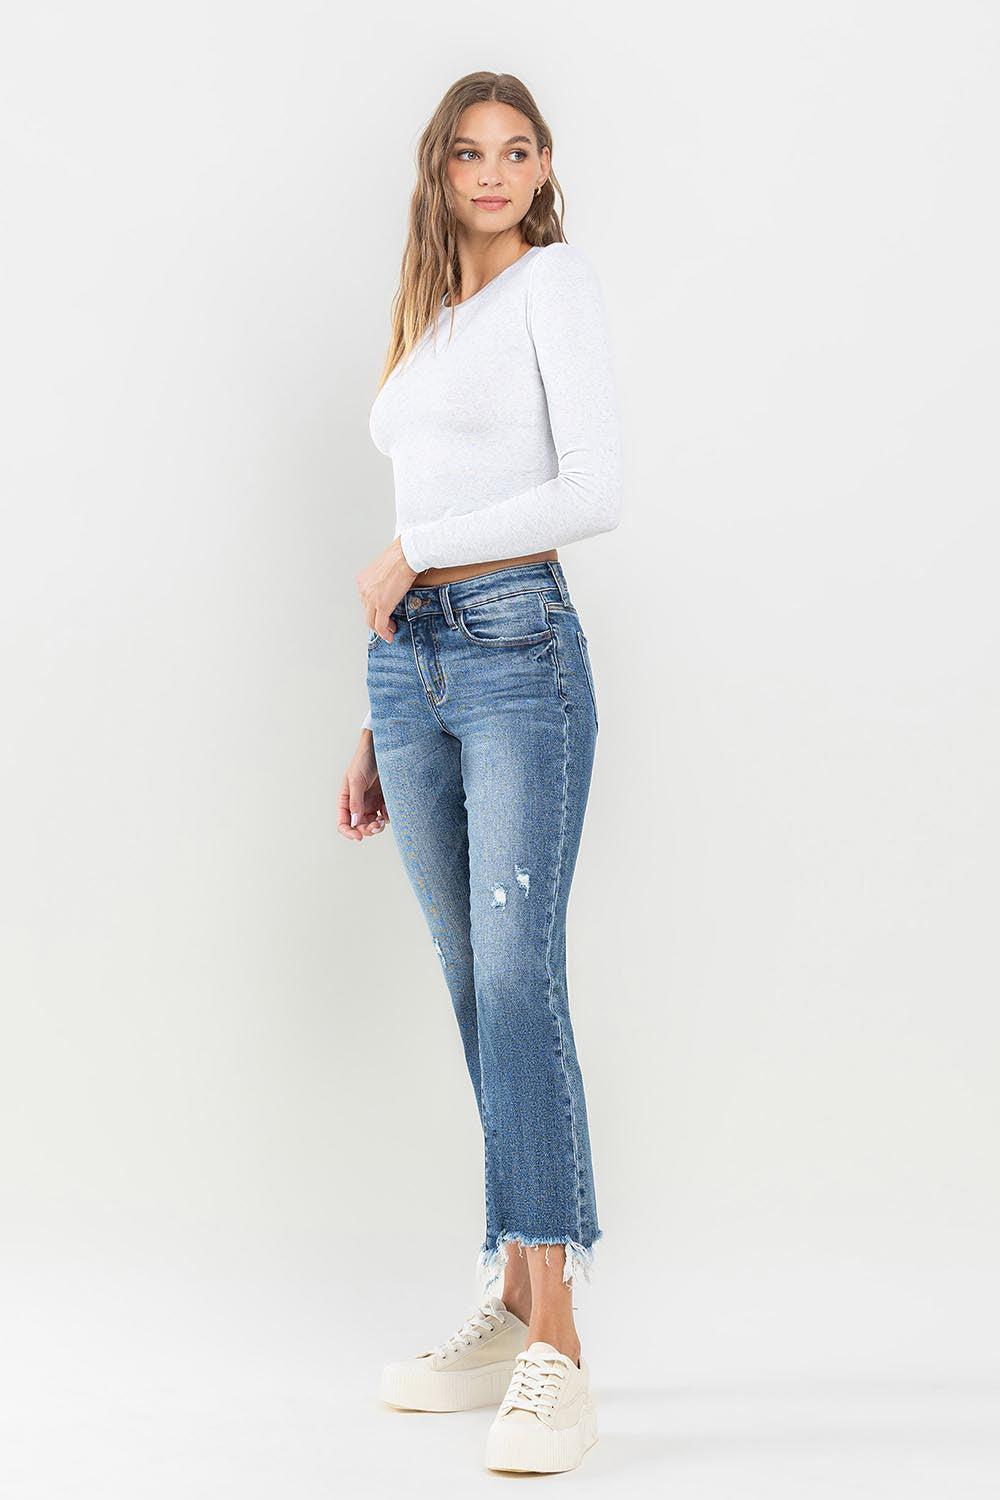 a woman wearing a white sweater and jeans